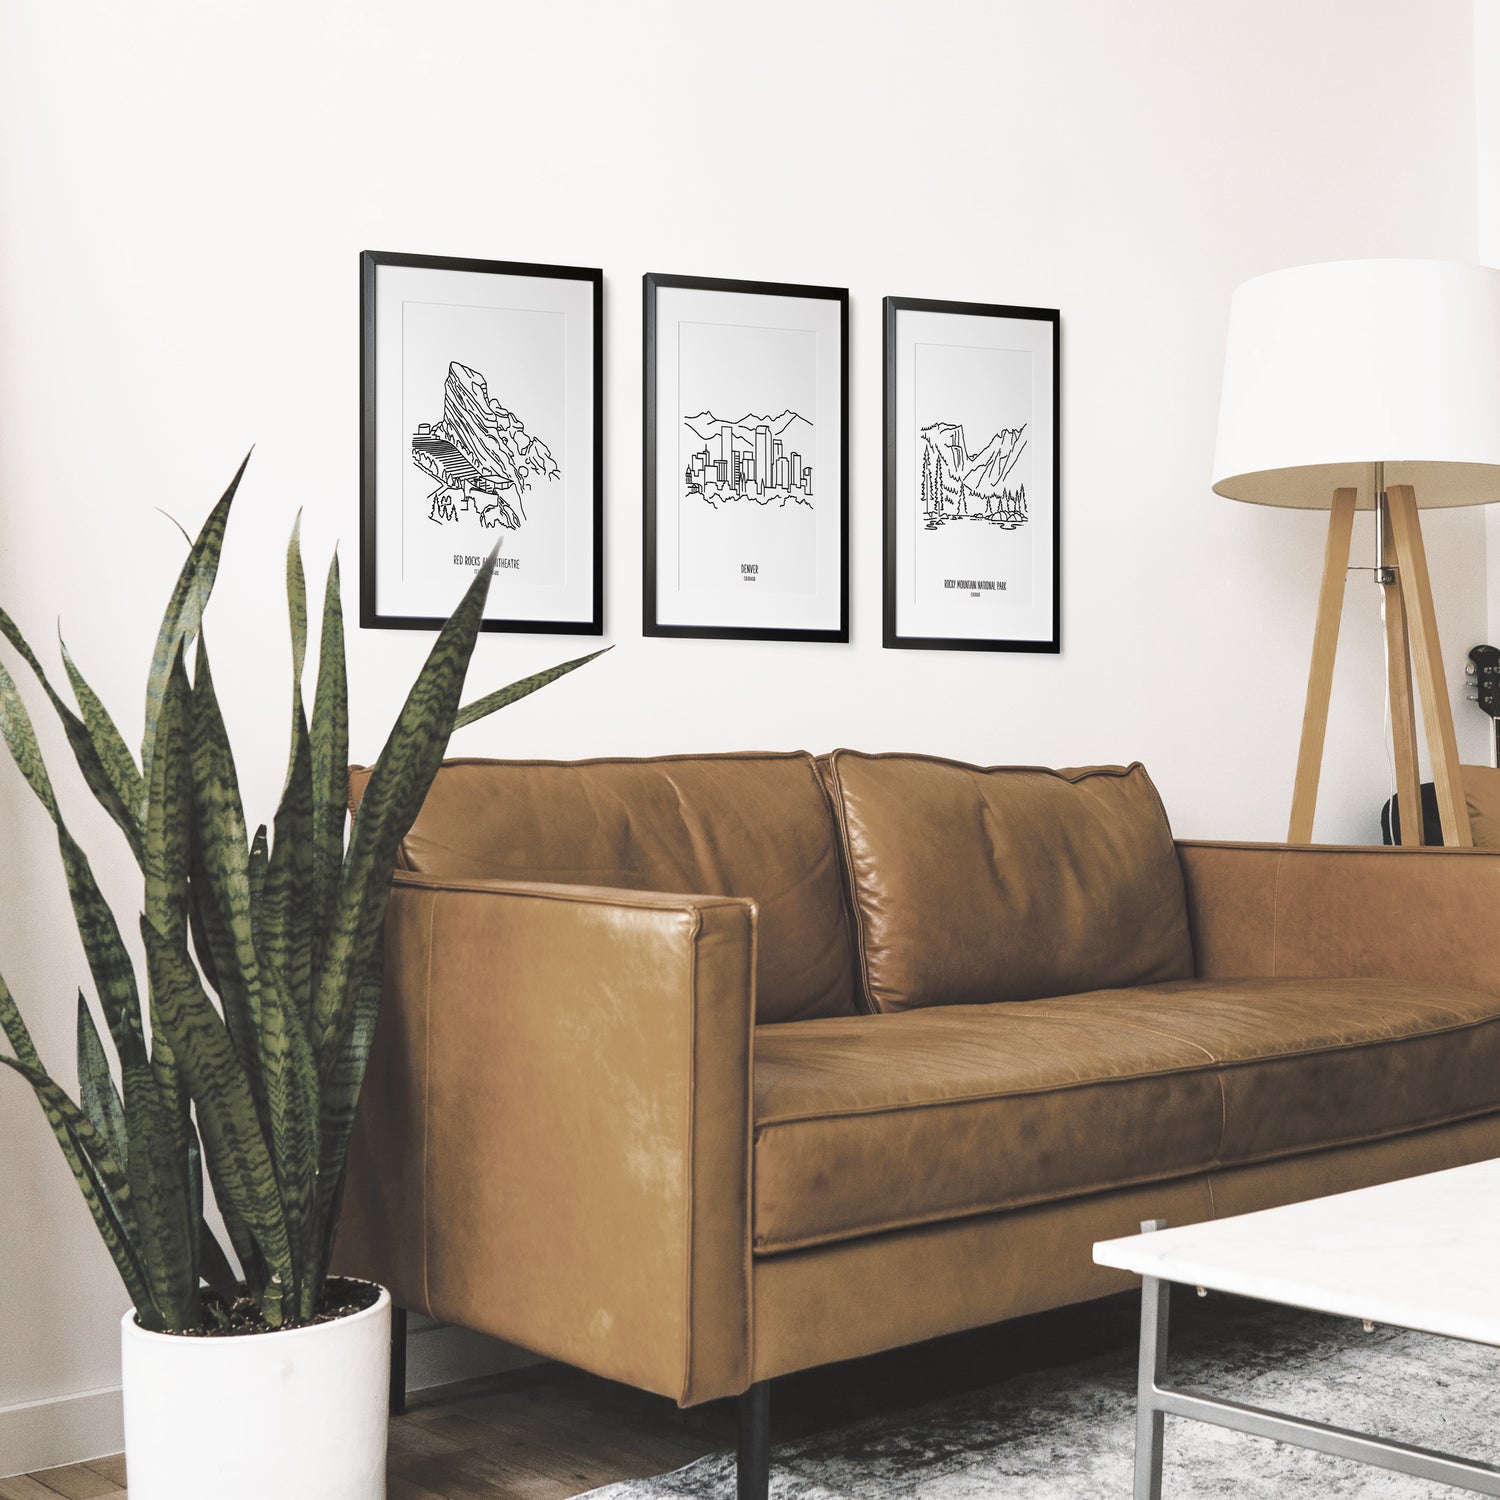 A group of three framed drawings on a wall above a couch with a potted plant